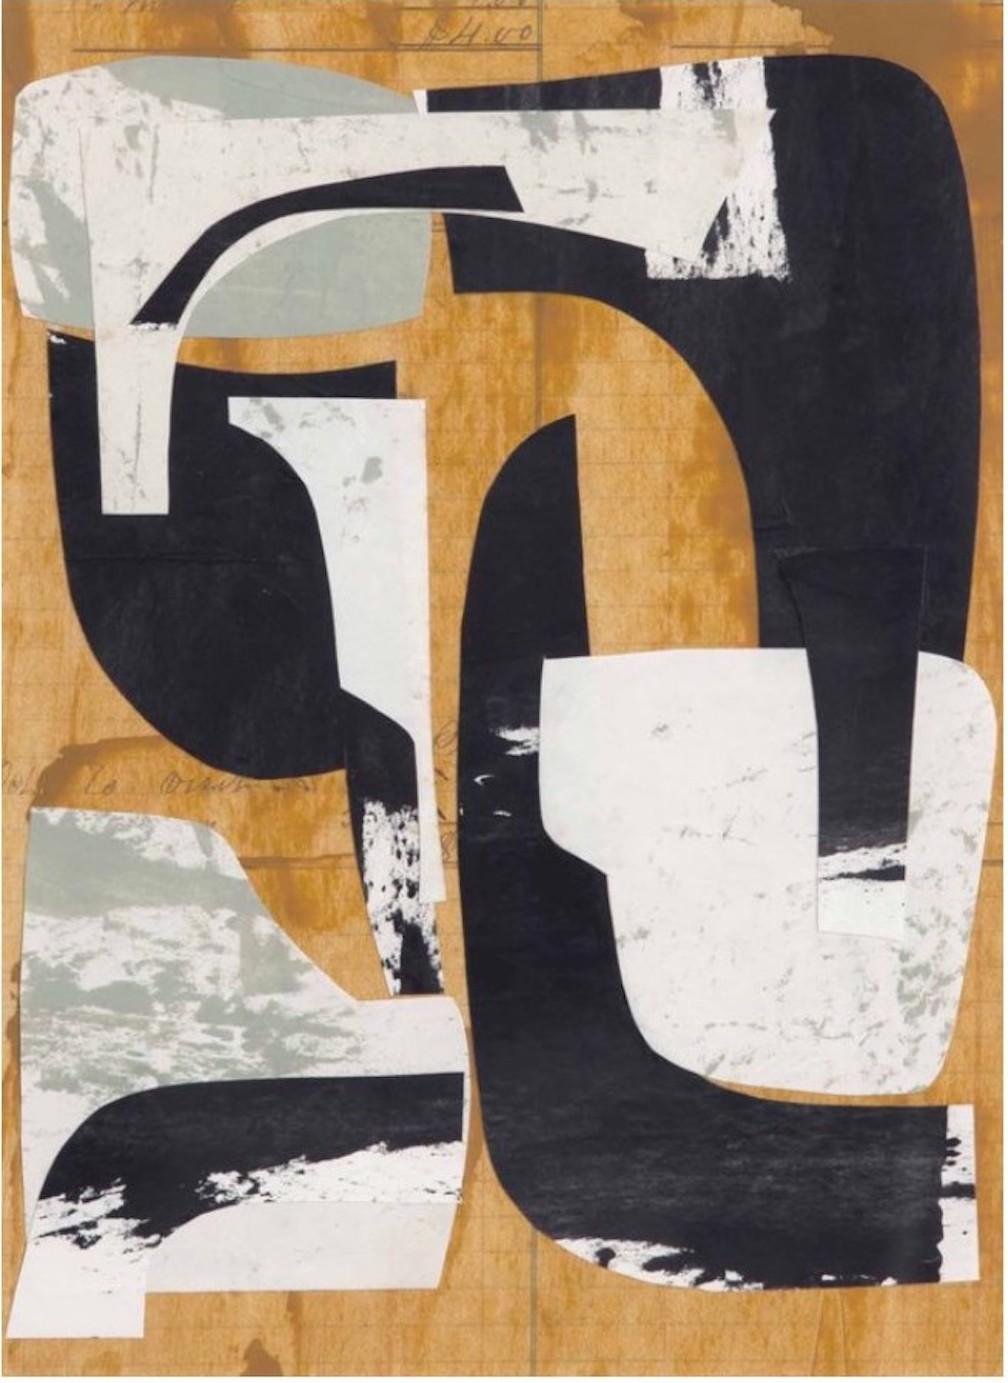 Untitled June, Abstract Painted Paper Collage in Brown, Black, Gray, White - Mixed Media Art by Daniel Anselmi